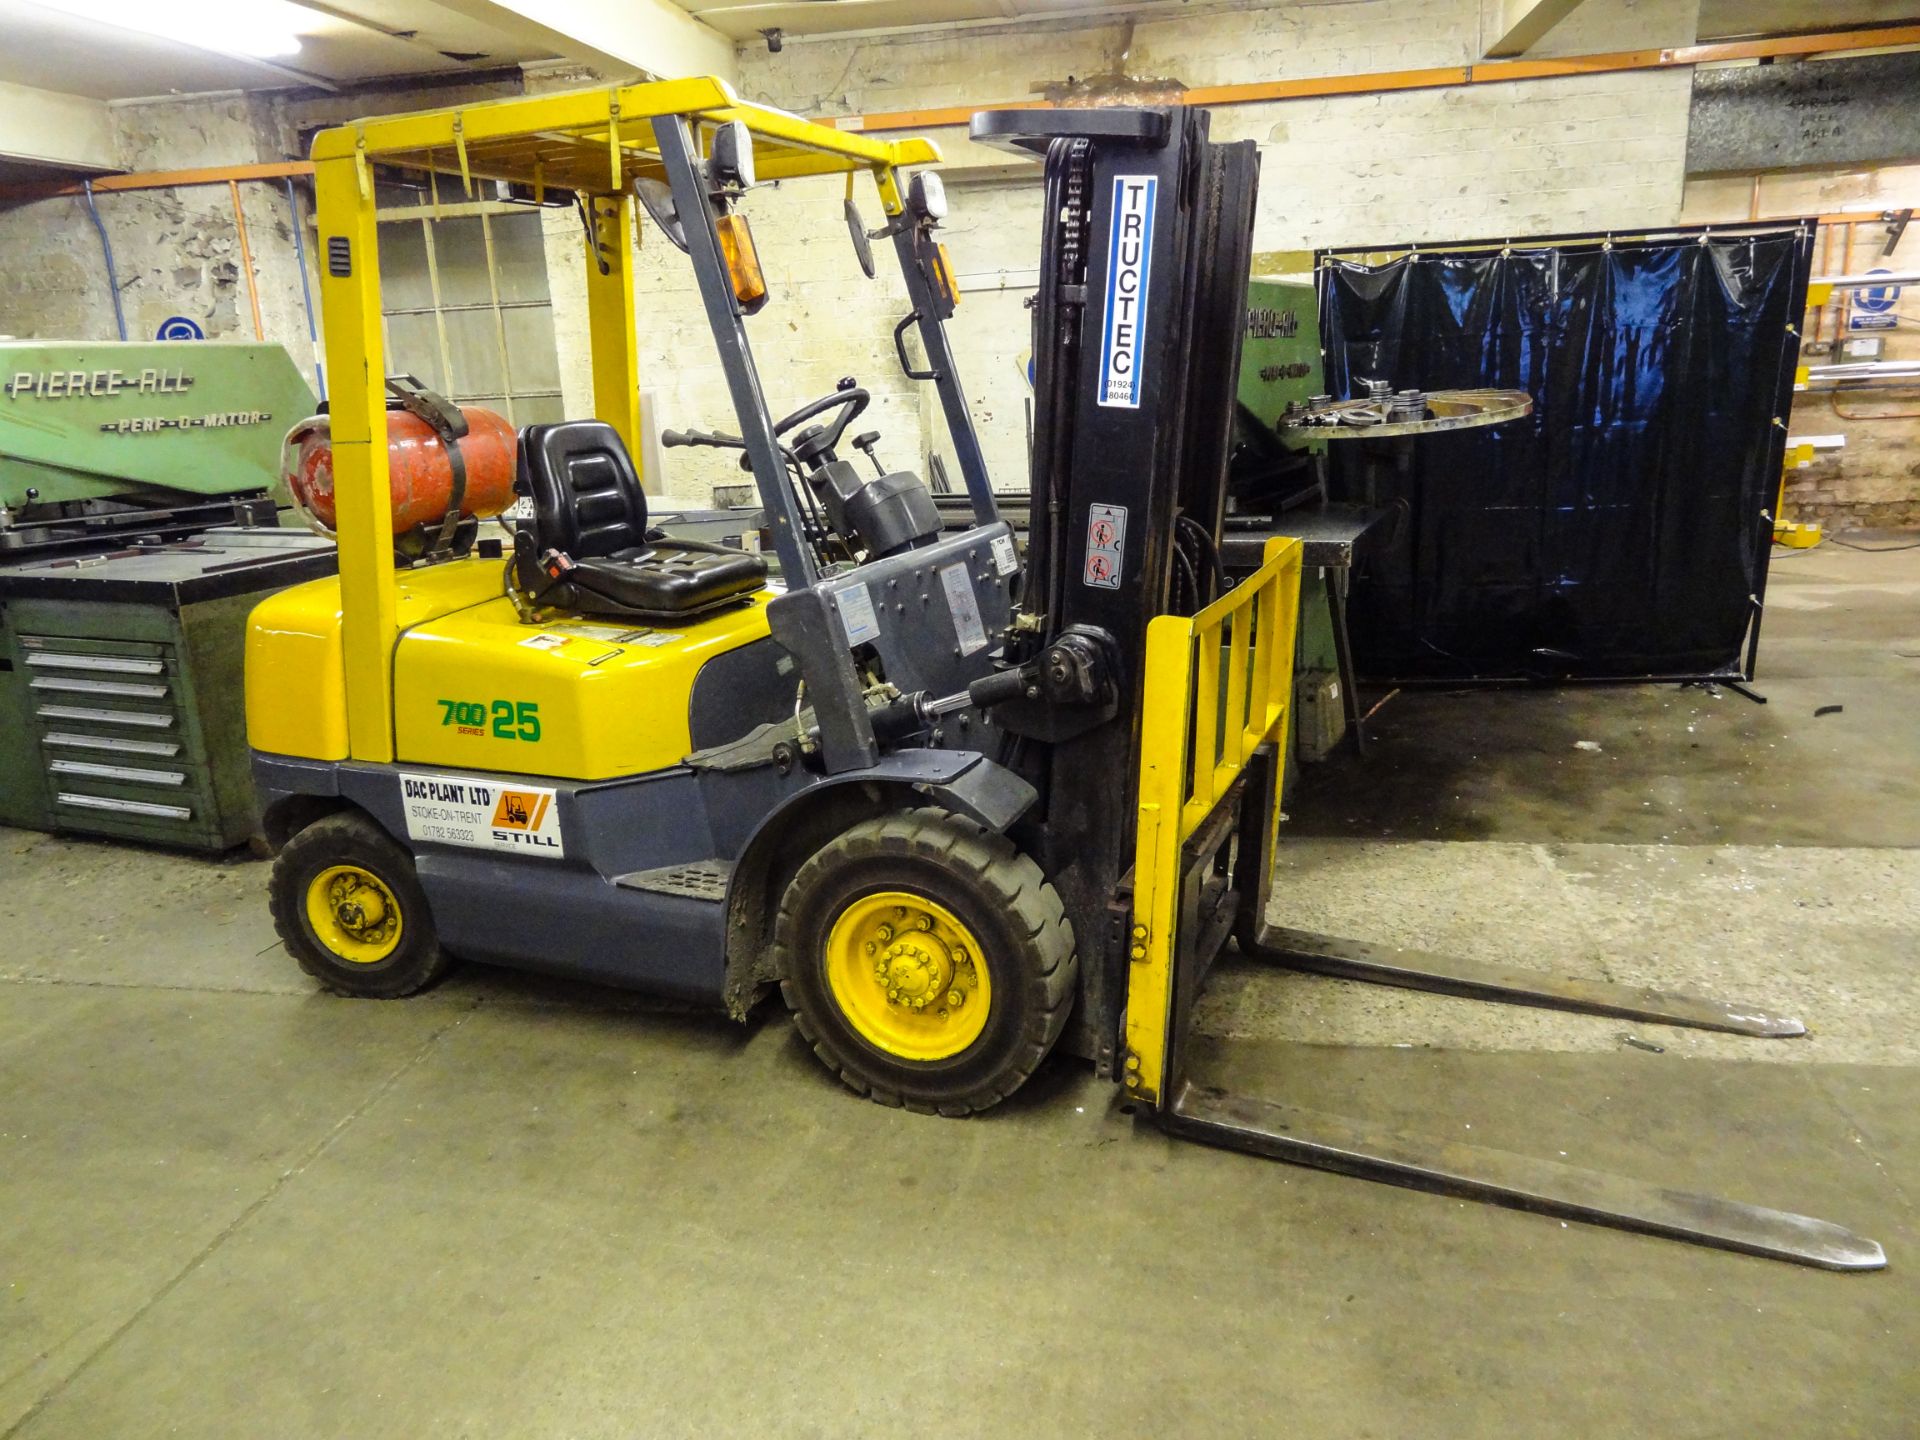 TCM SERIES 700 25 2500kg LPG FORKLIFT TRUCK, year of manufacture 1998, indicated hours 2171 (at time - Image 2 of 2